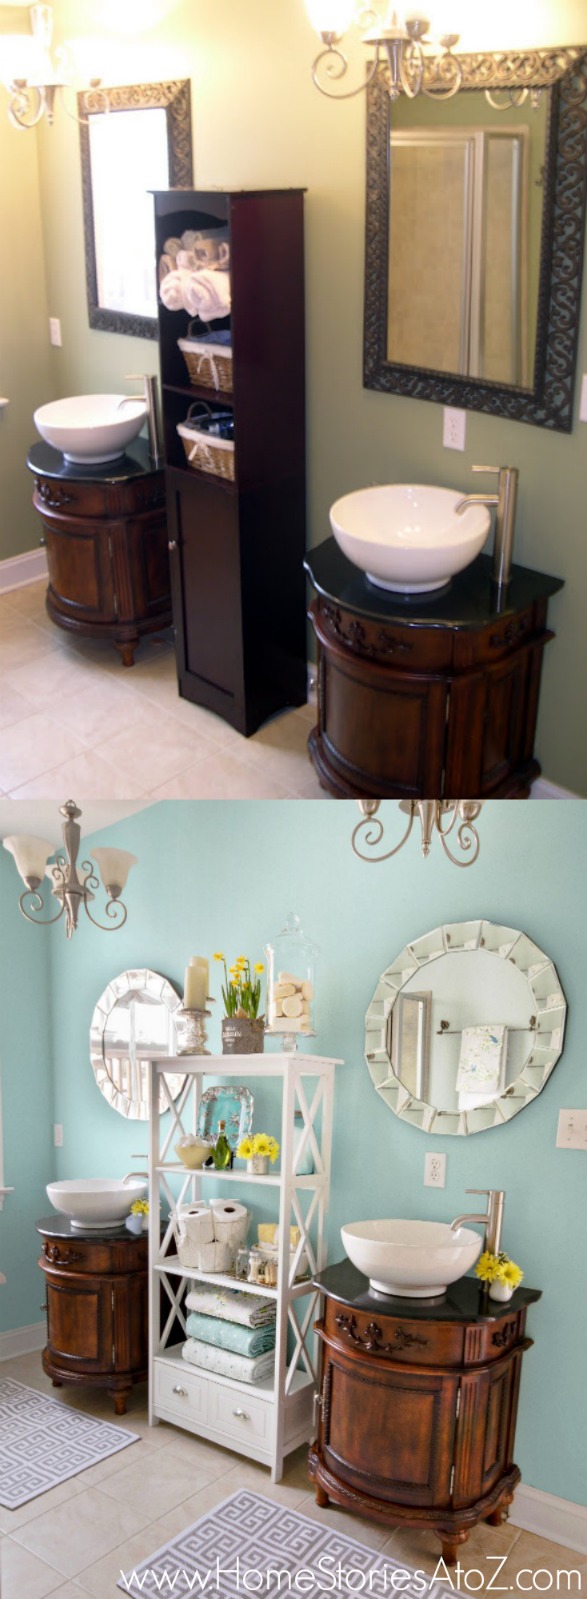 Bathroom makeover in Sherwin-Williams Watery